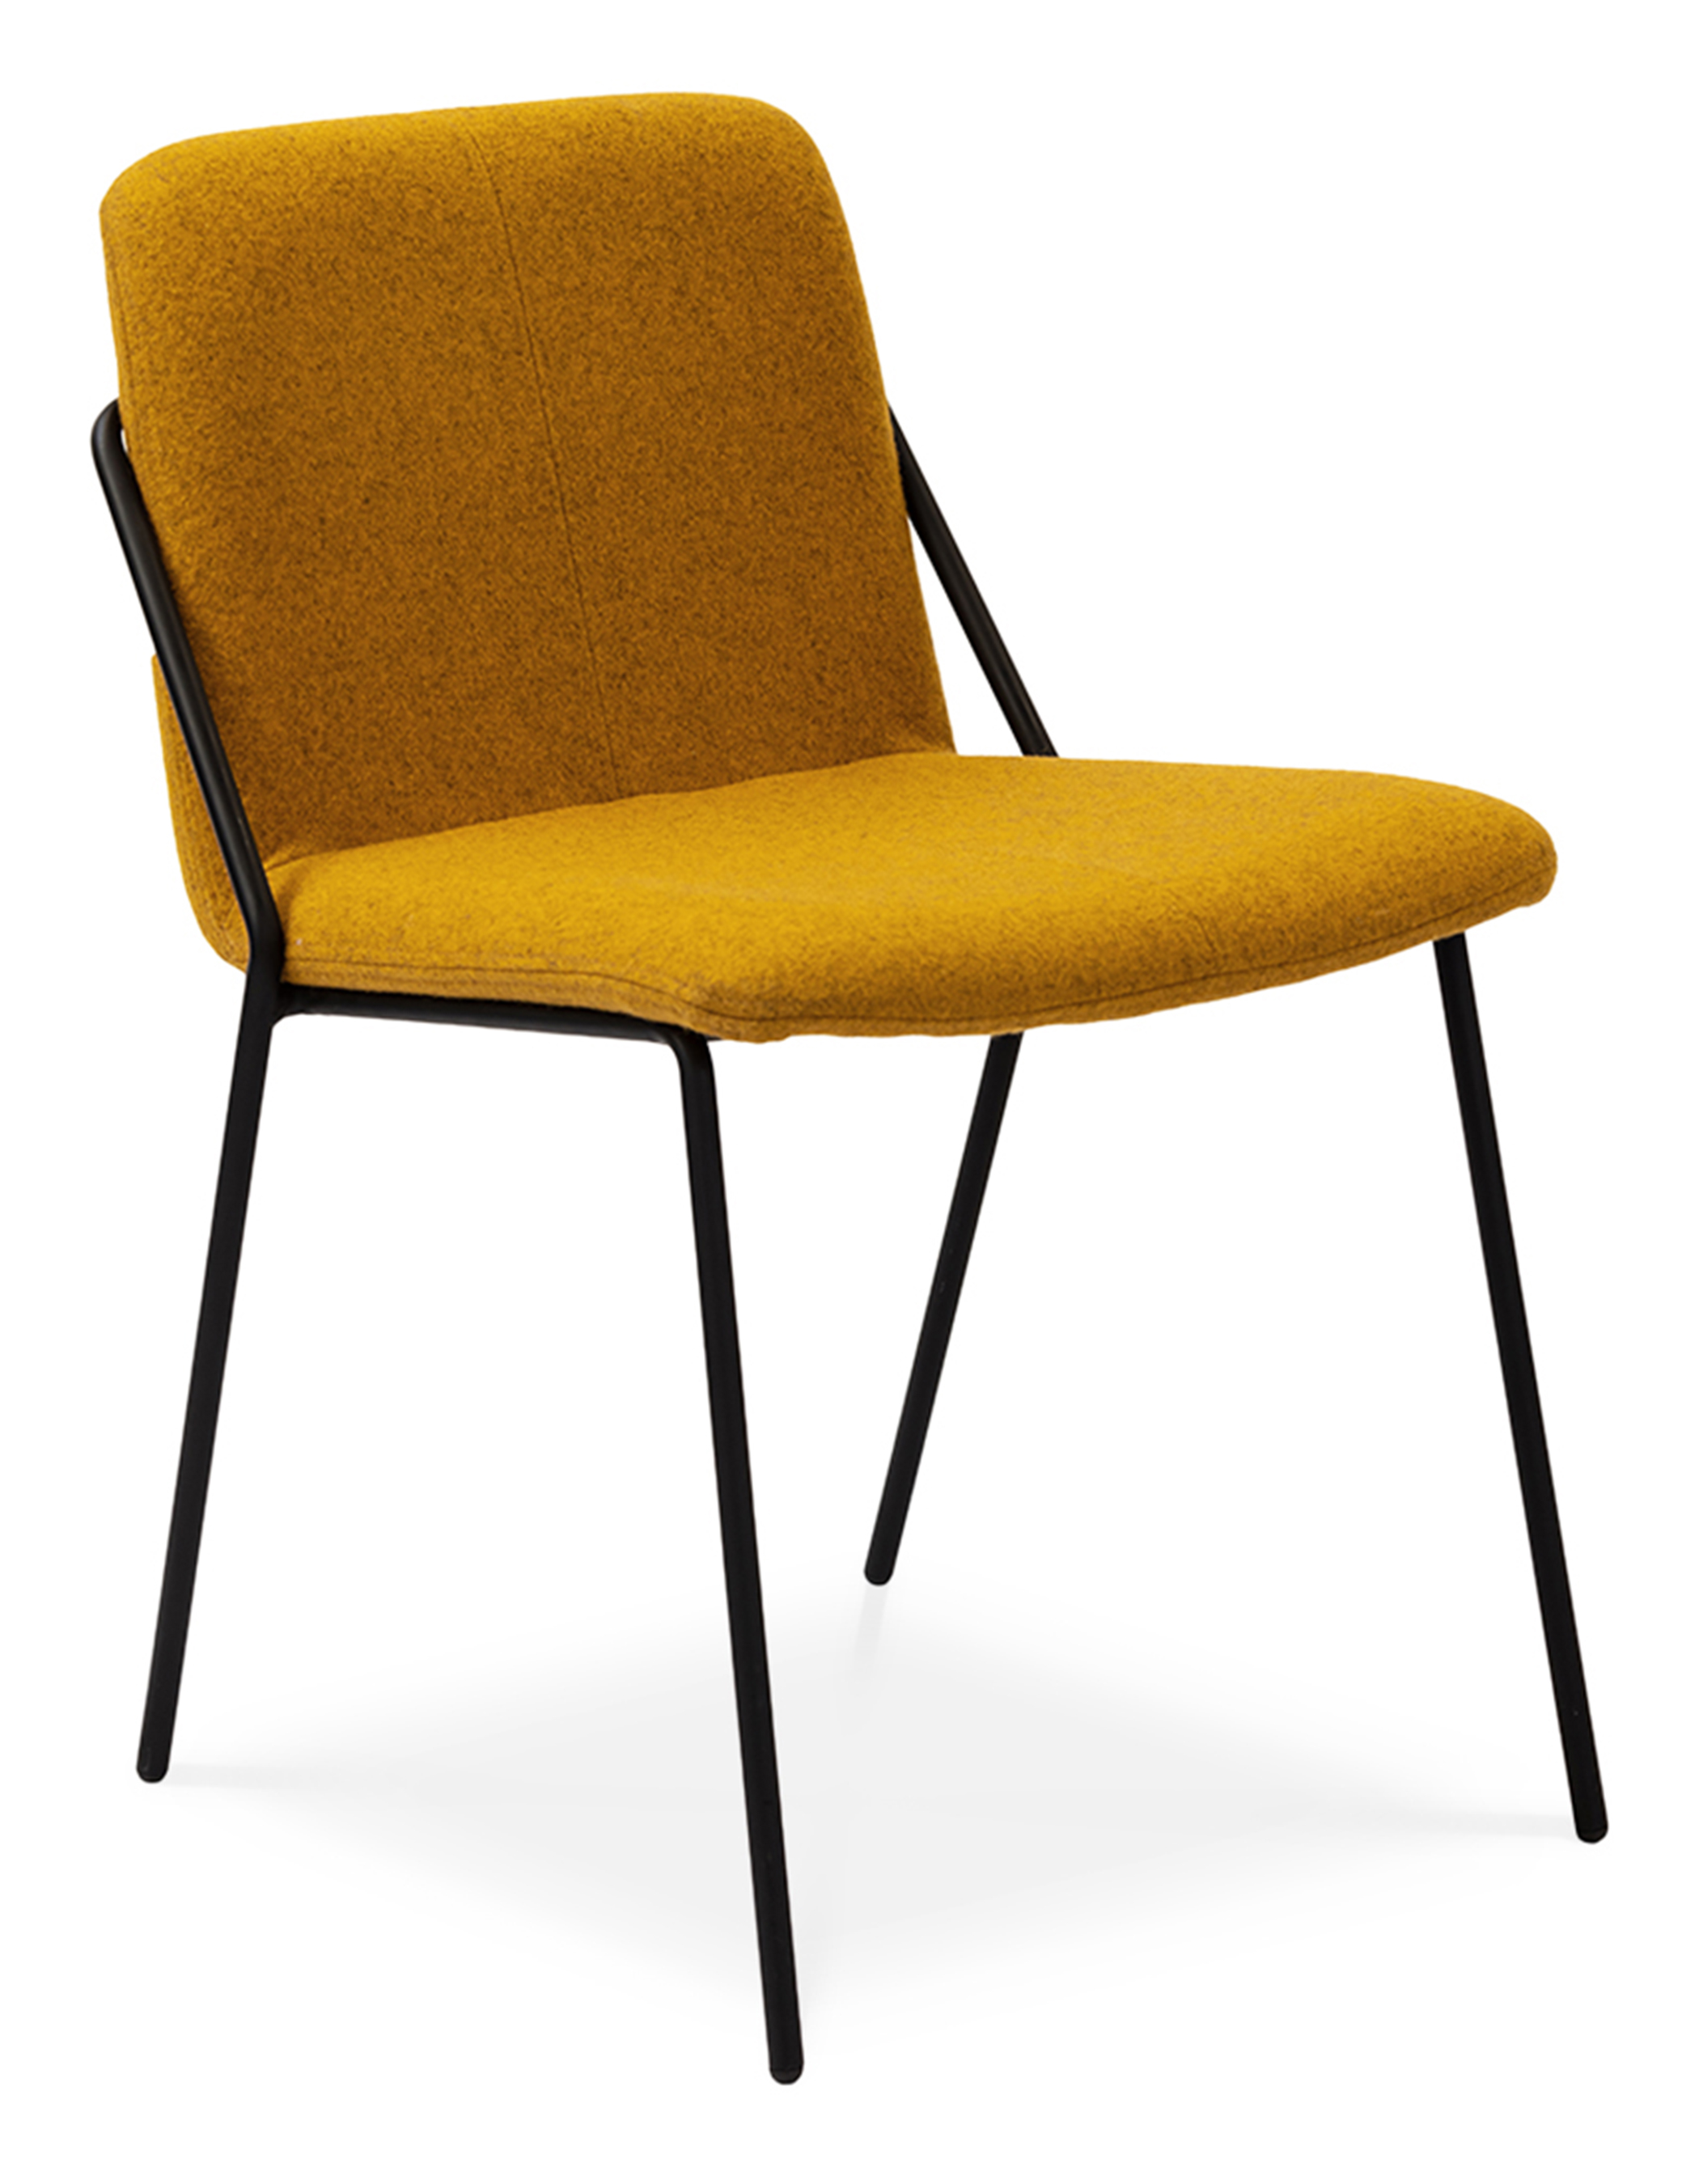 WS - Sling side chair - Upholstered yellow (Front angle)